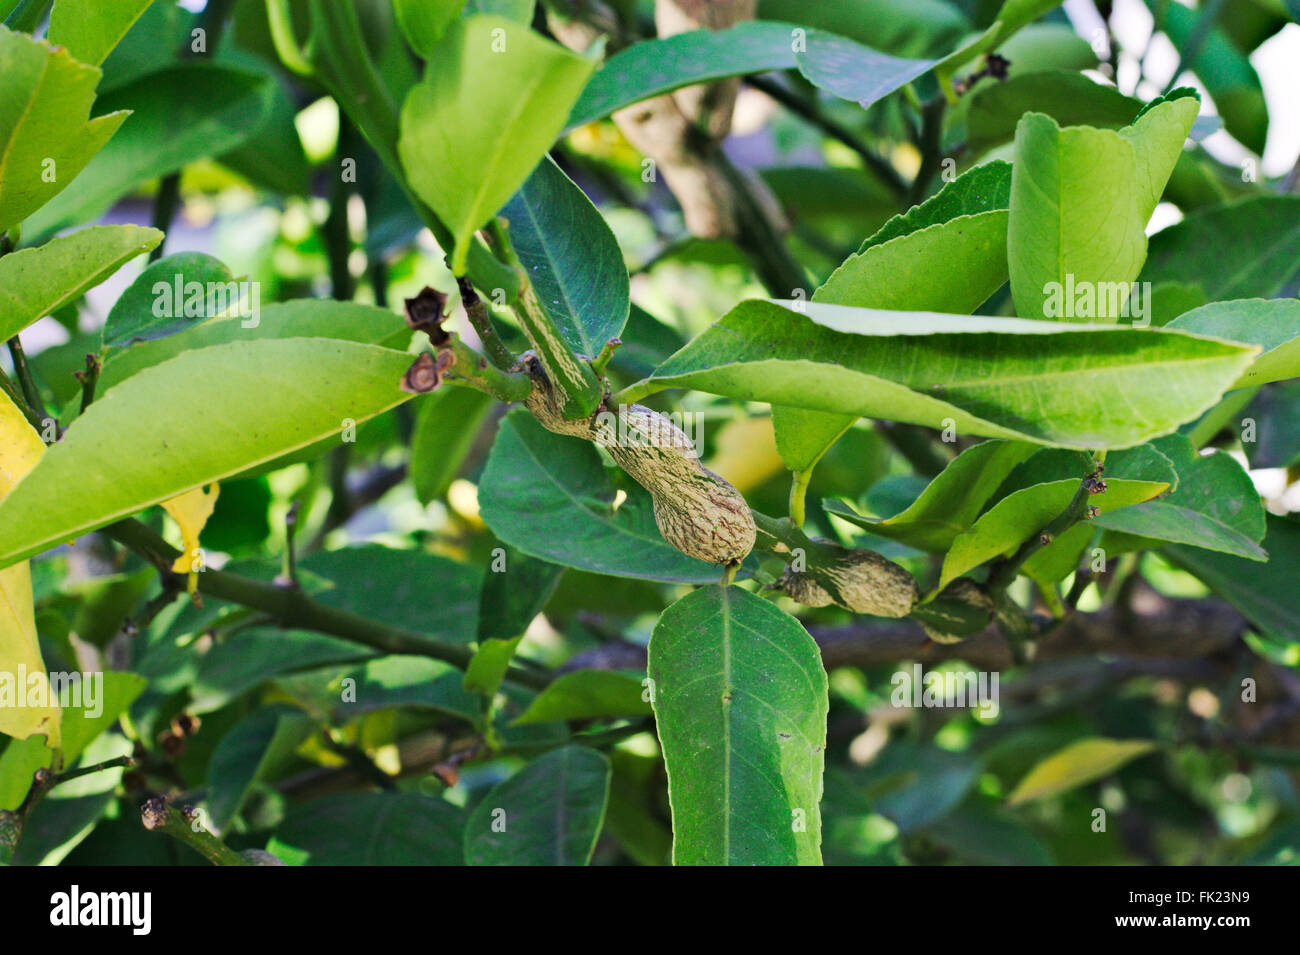 Gall wasp damage on the branch of a lemon tree. Stock Photo